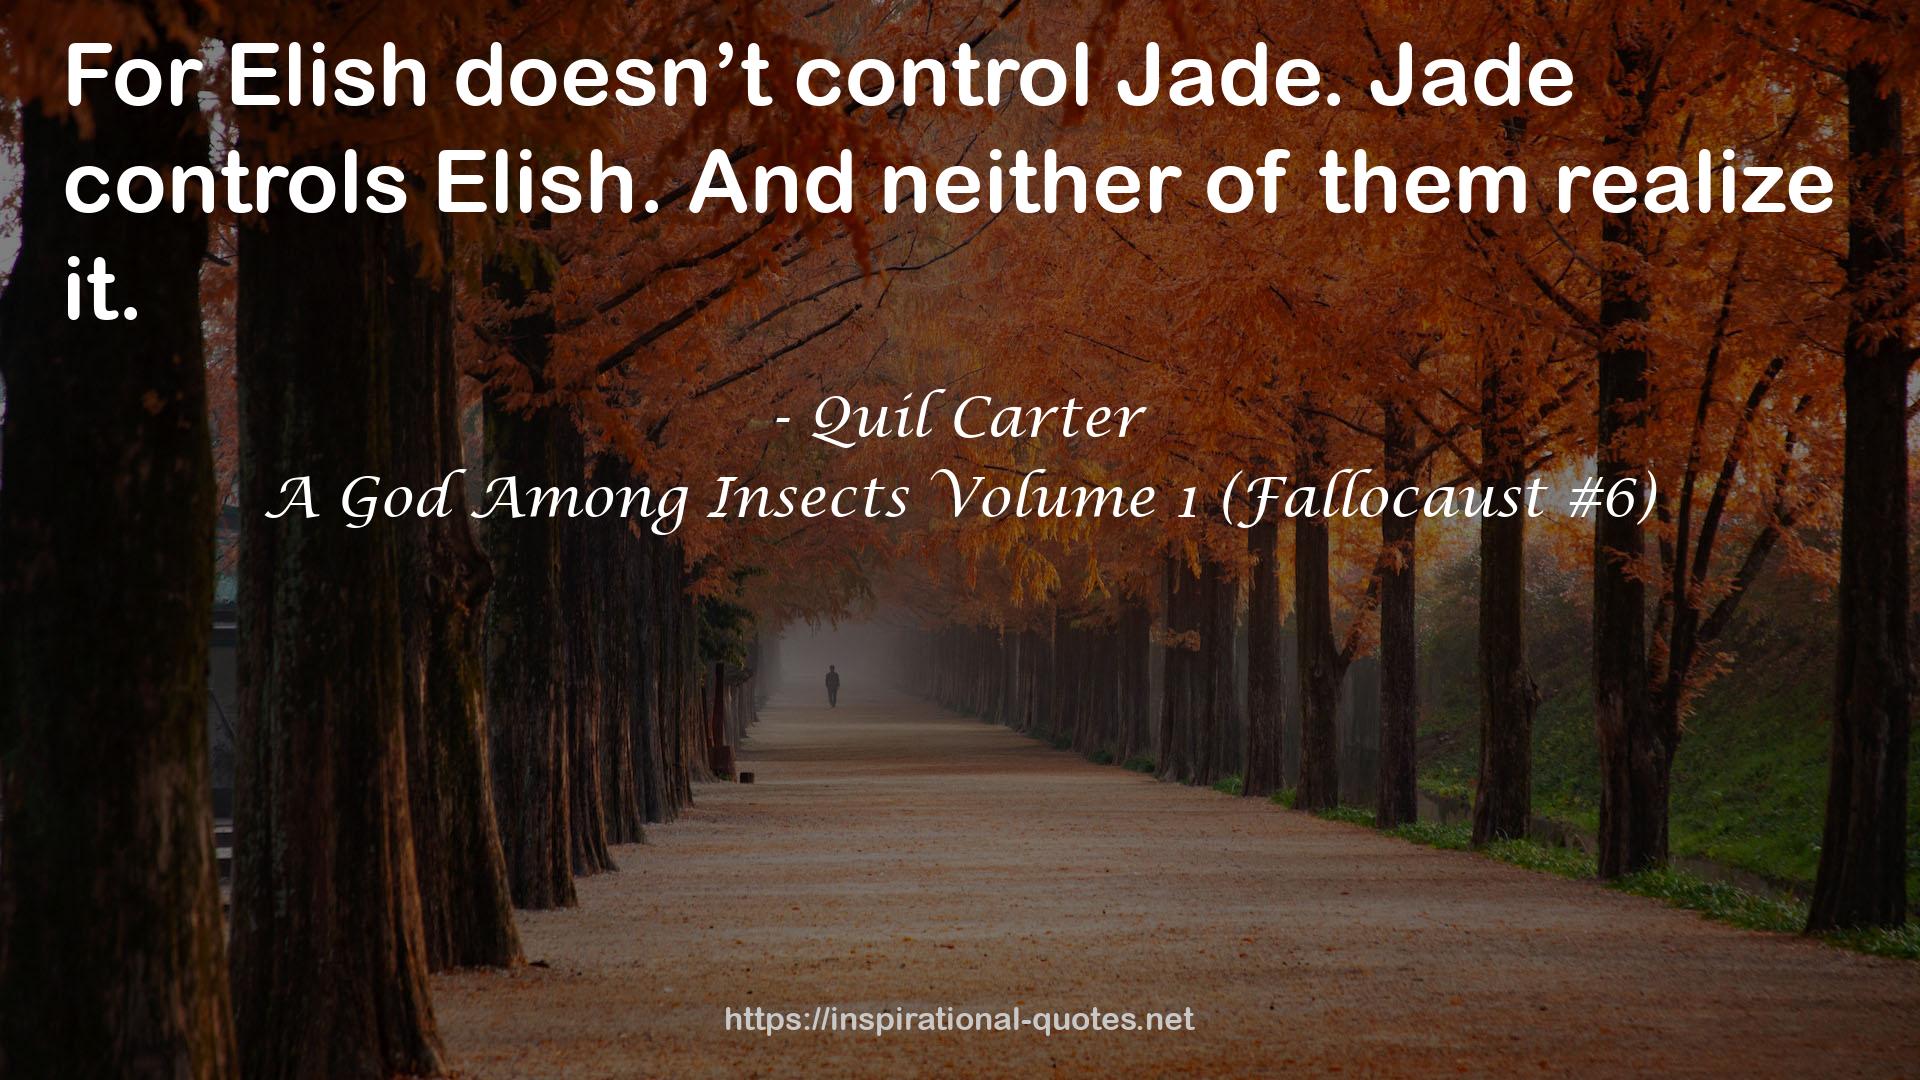 A God Among Insects Volume 1 (Fallocaust #6) QUOTES